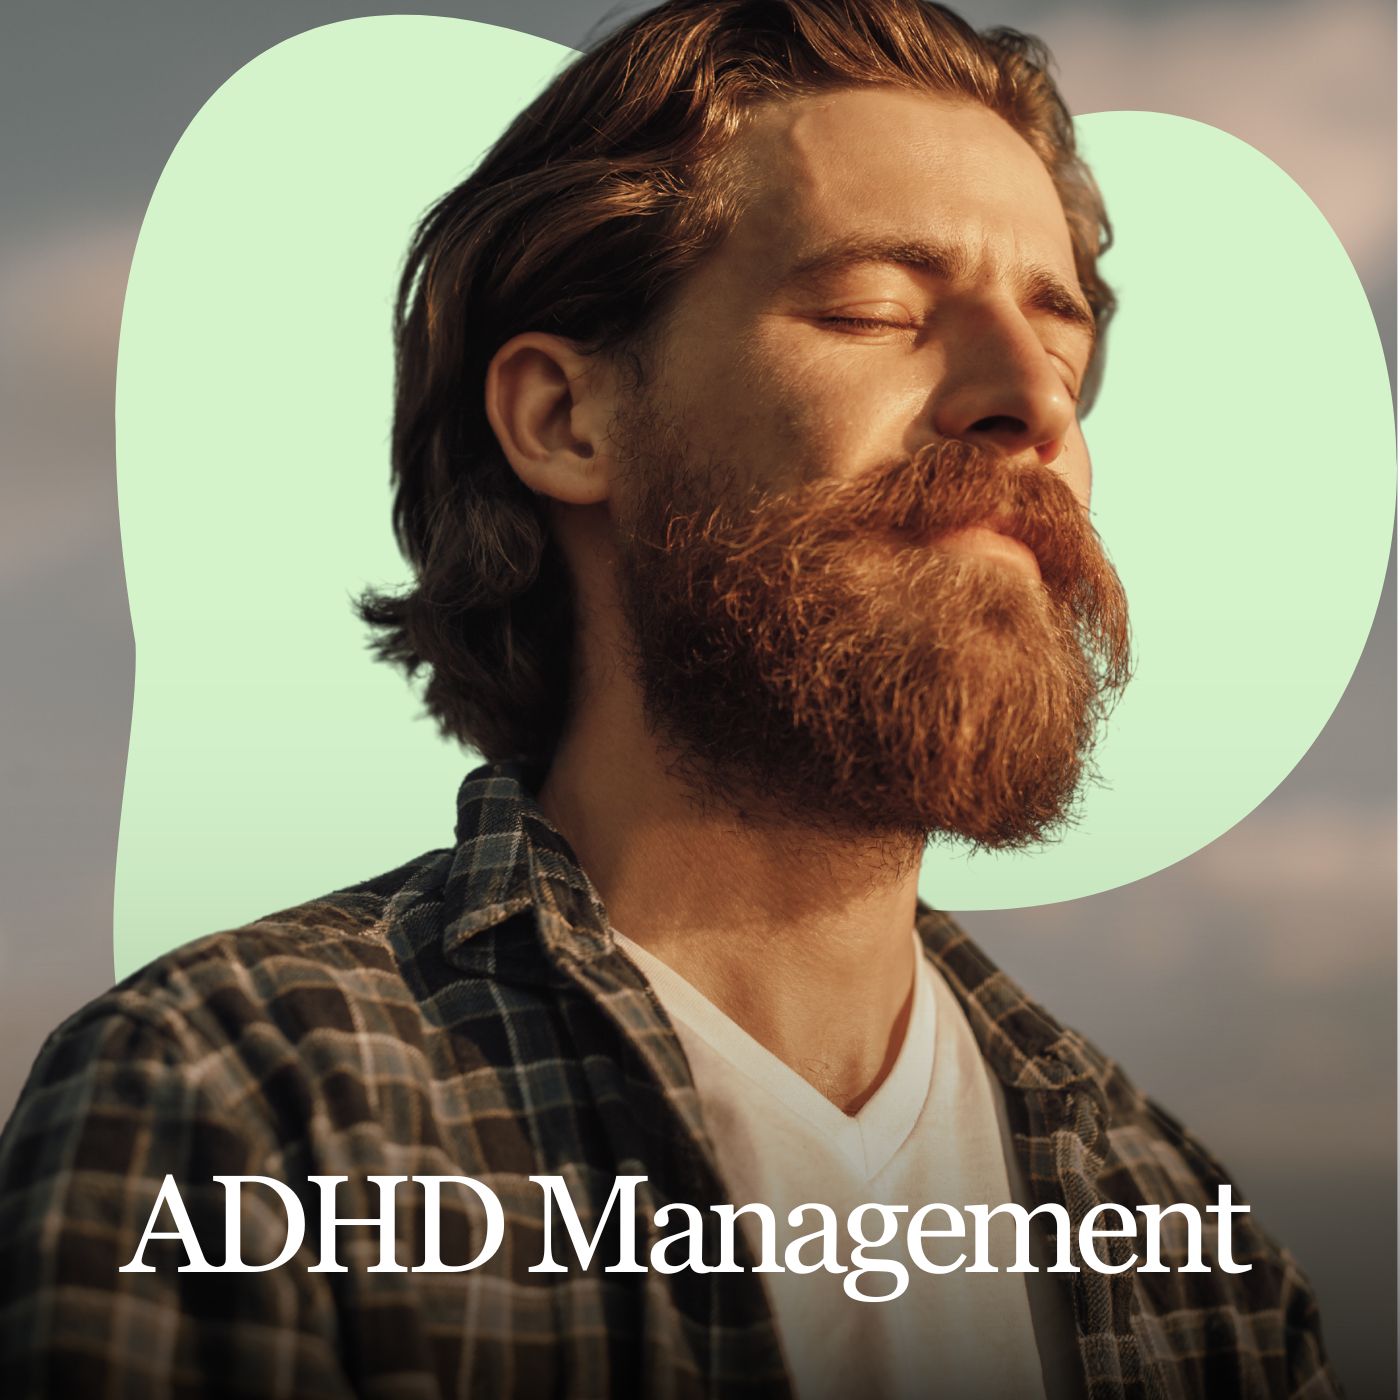 ADHD Management Hypnotherapy - Clearmindshypnotherapy